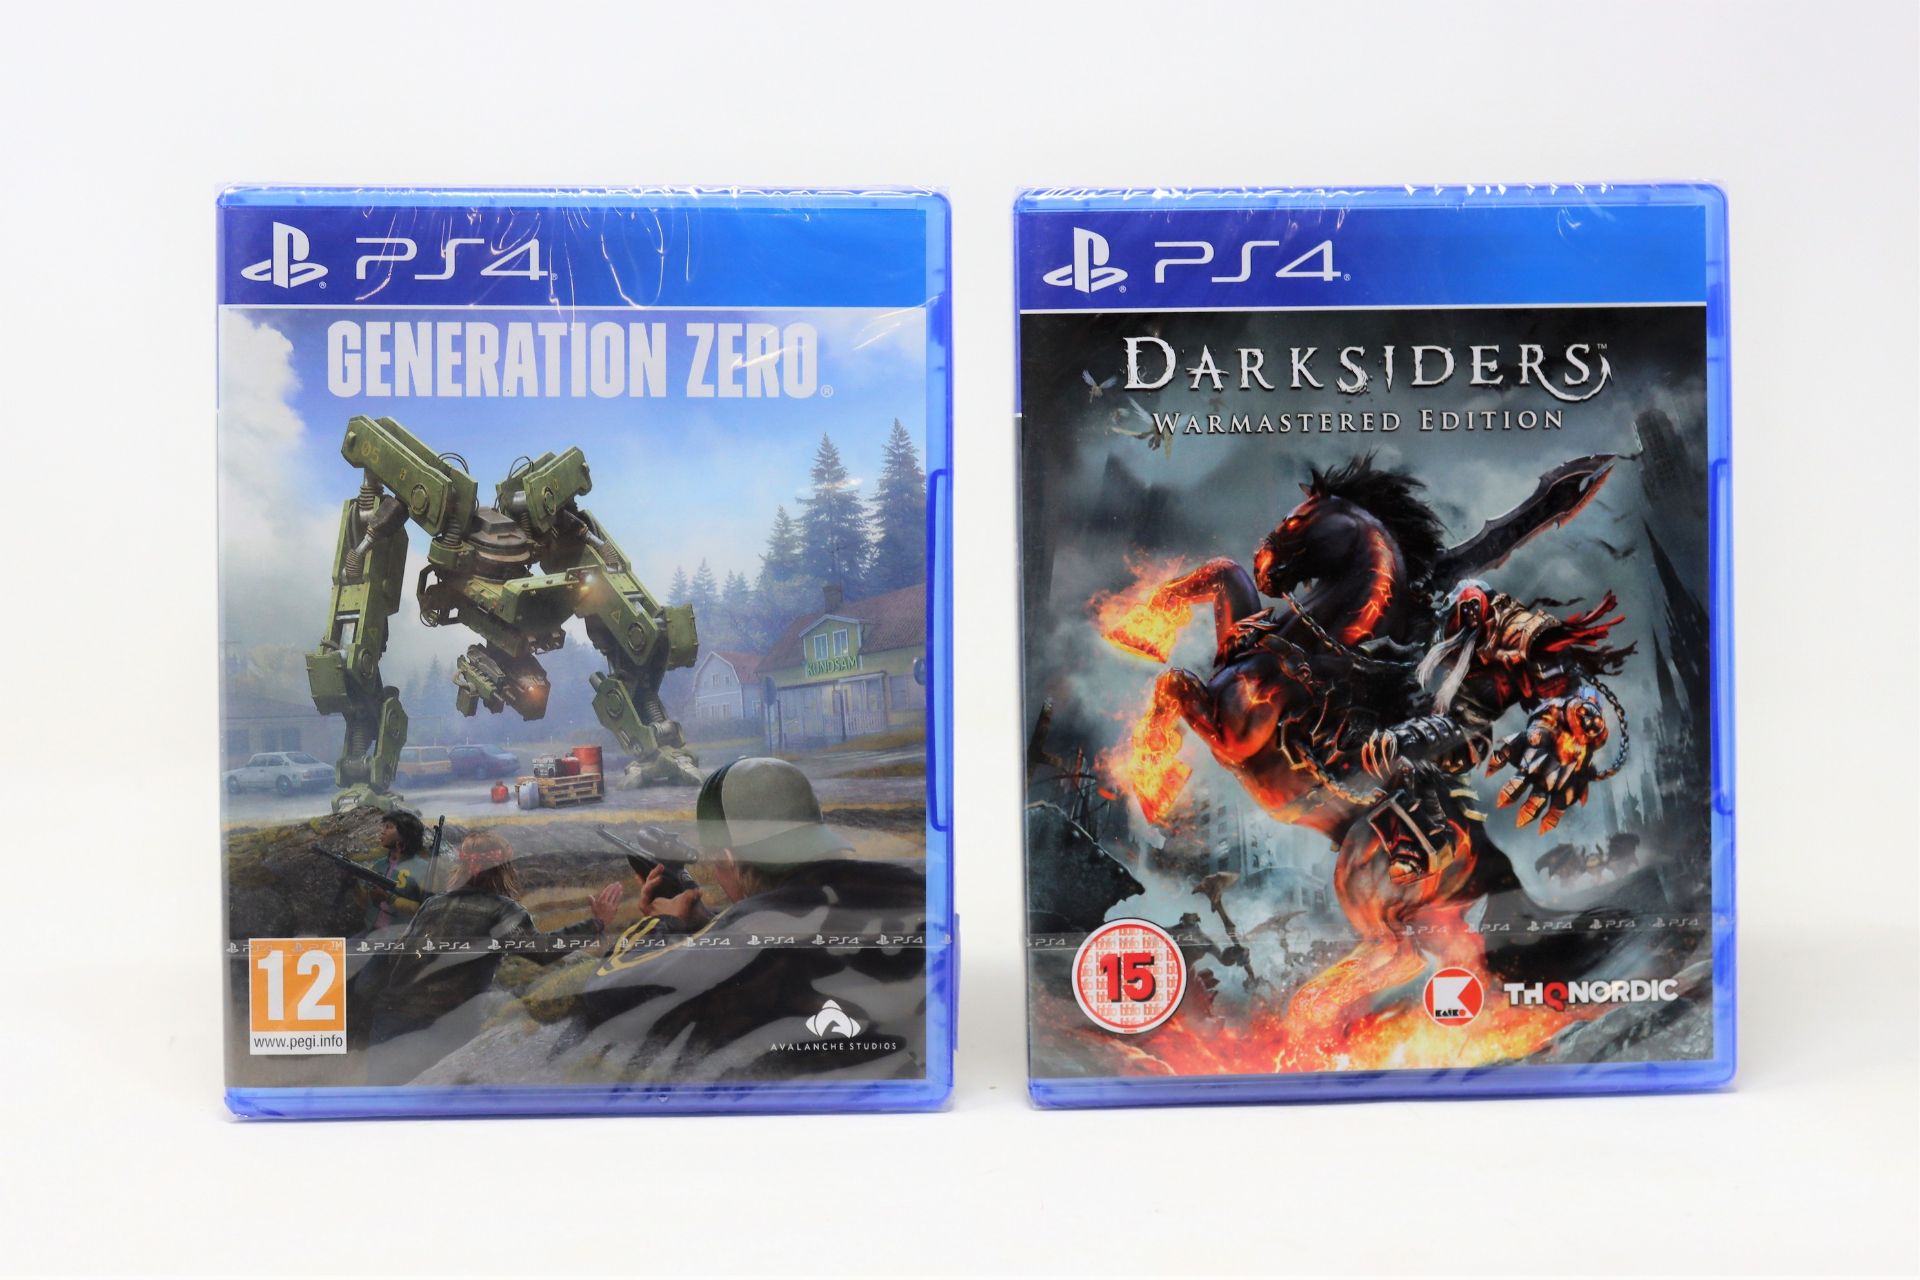 Seven as new Darksiders Warmastered Edition game disks for Sony PS4 and two as new Generation Zero